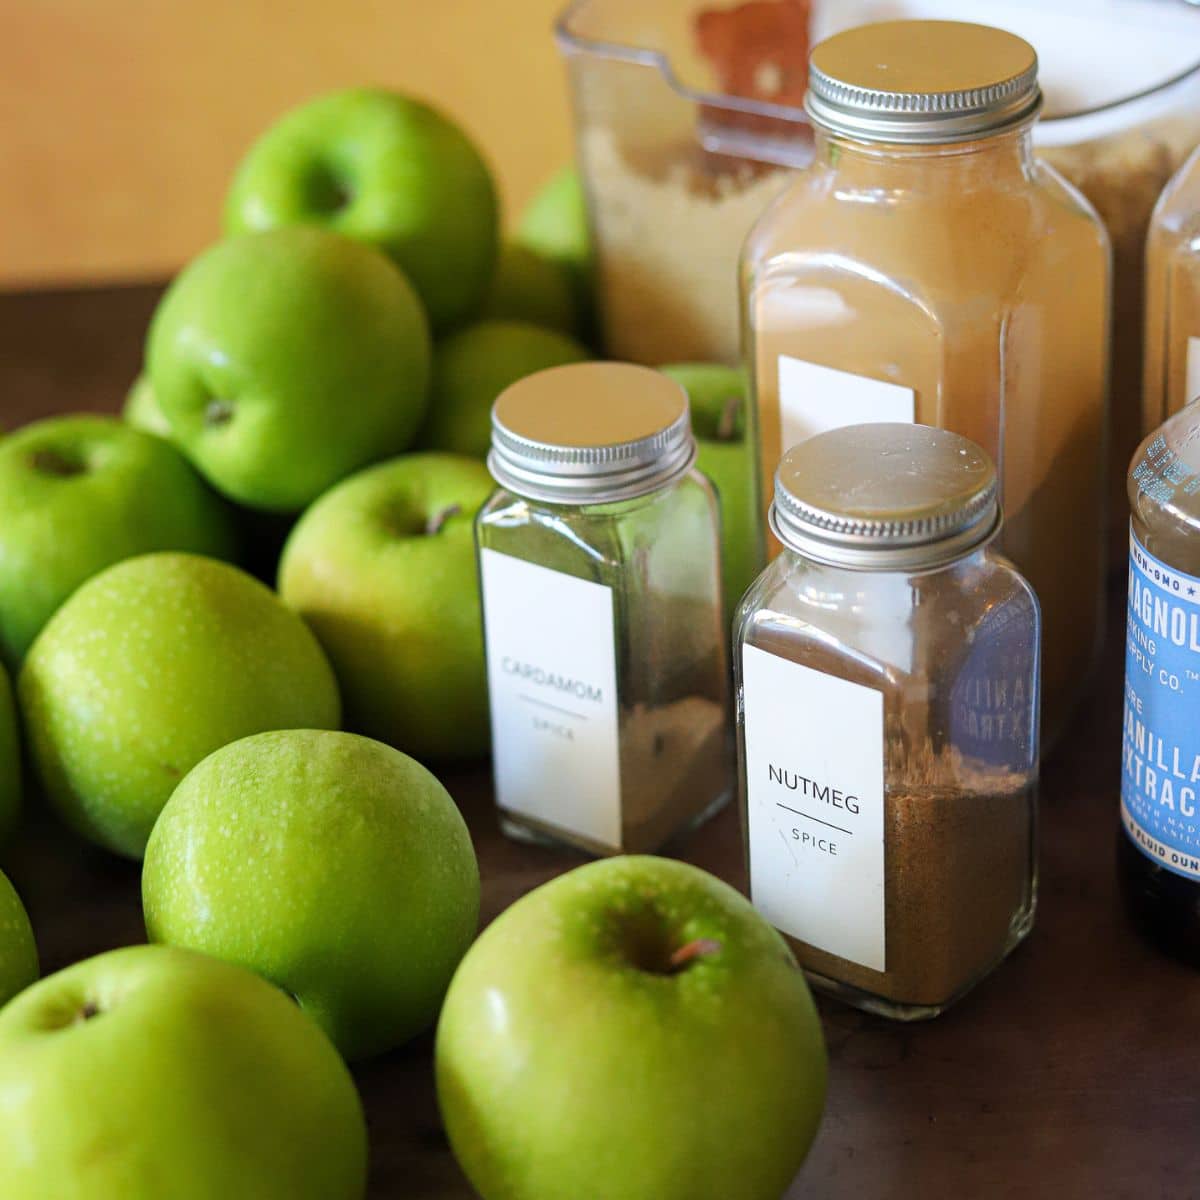 ingredients for homemade applesauce in the instant pot including apples, spices, brown sugar, and vanilla extract.